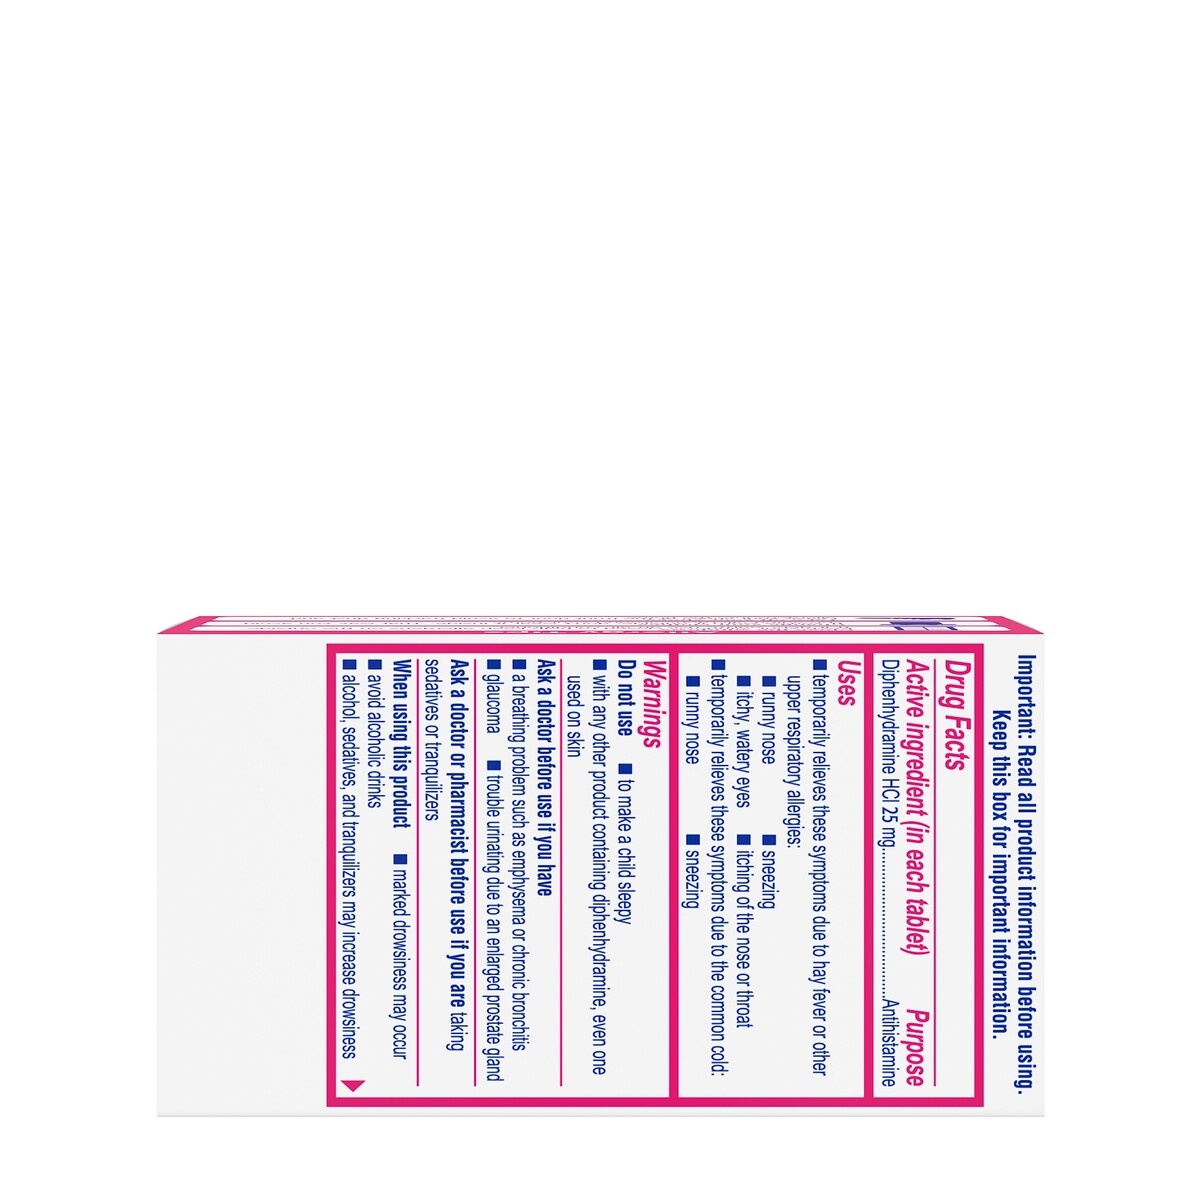 slide 5 of 5, Benadryl Ultratabs Antihistamine Allergy Relief Medicine, 25 mg Diphenhydramine HCl Tablets For Relief of Allergy Symptoms Due to Hay Fever, Upper Respiratory Allergies & More, 100 ct; 25 mg